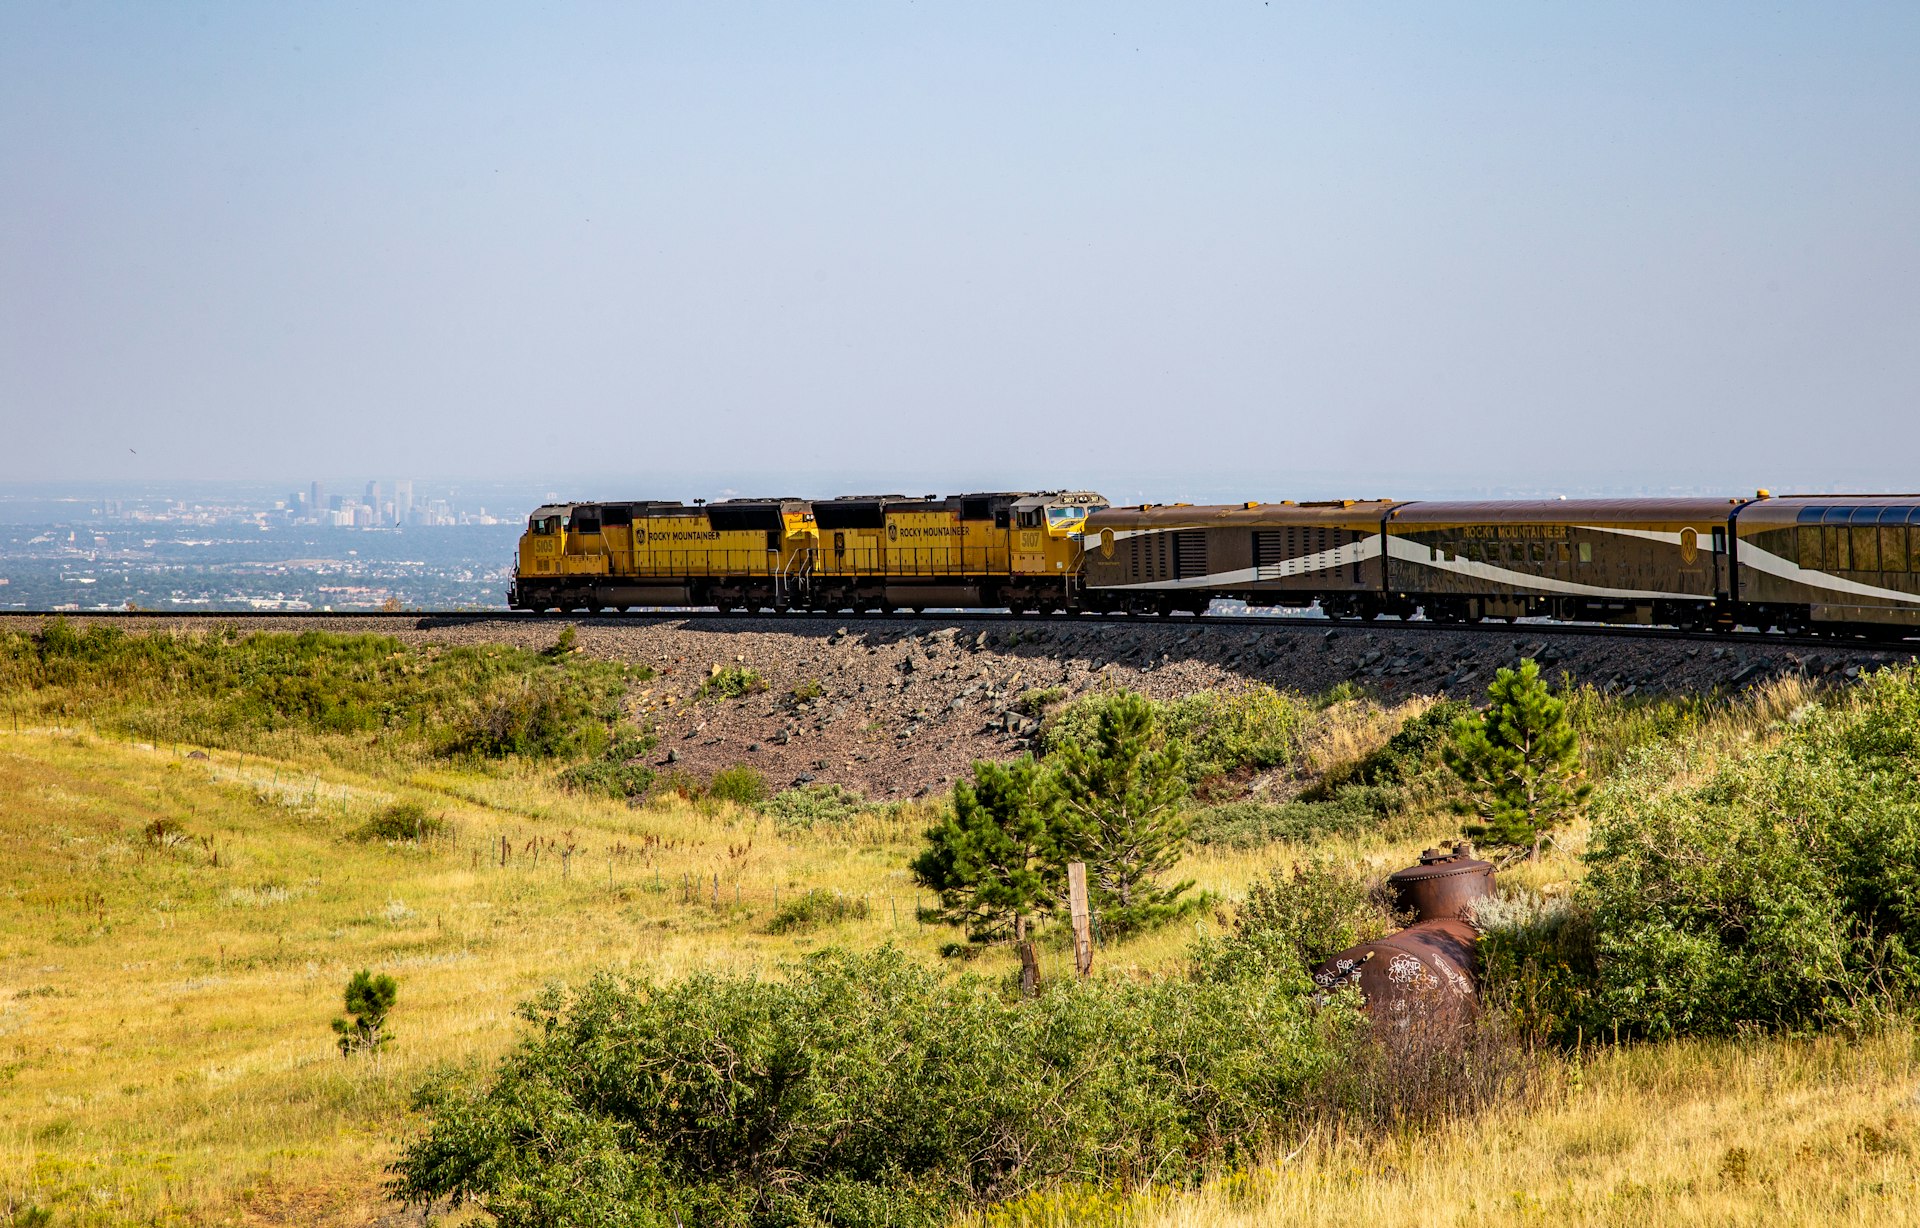 A train rounding a bend, with a city in the distance